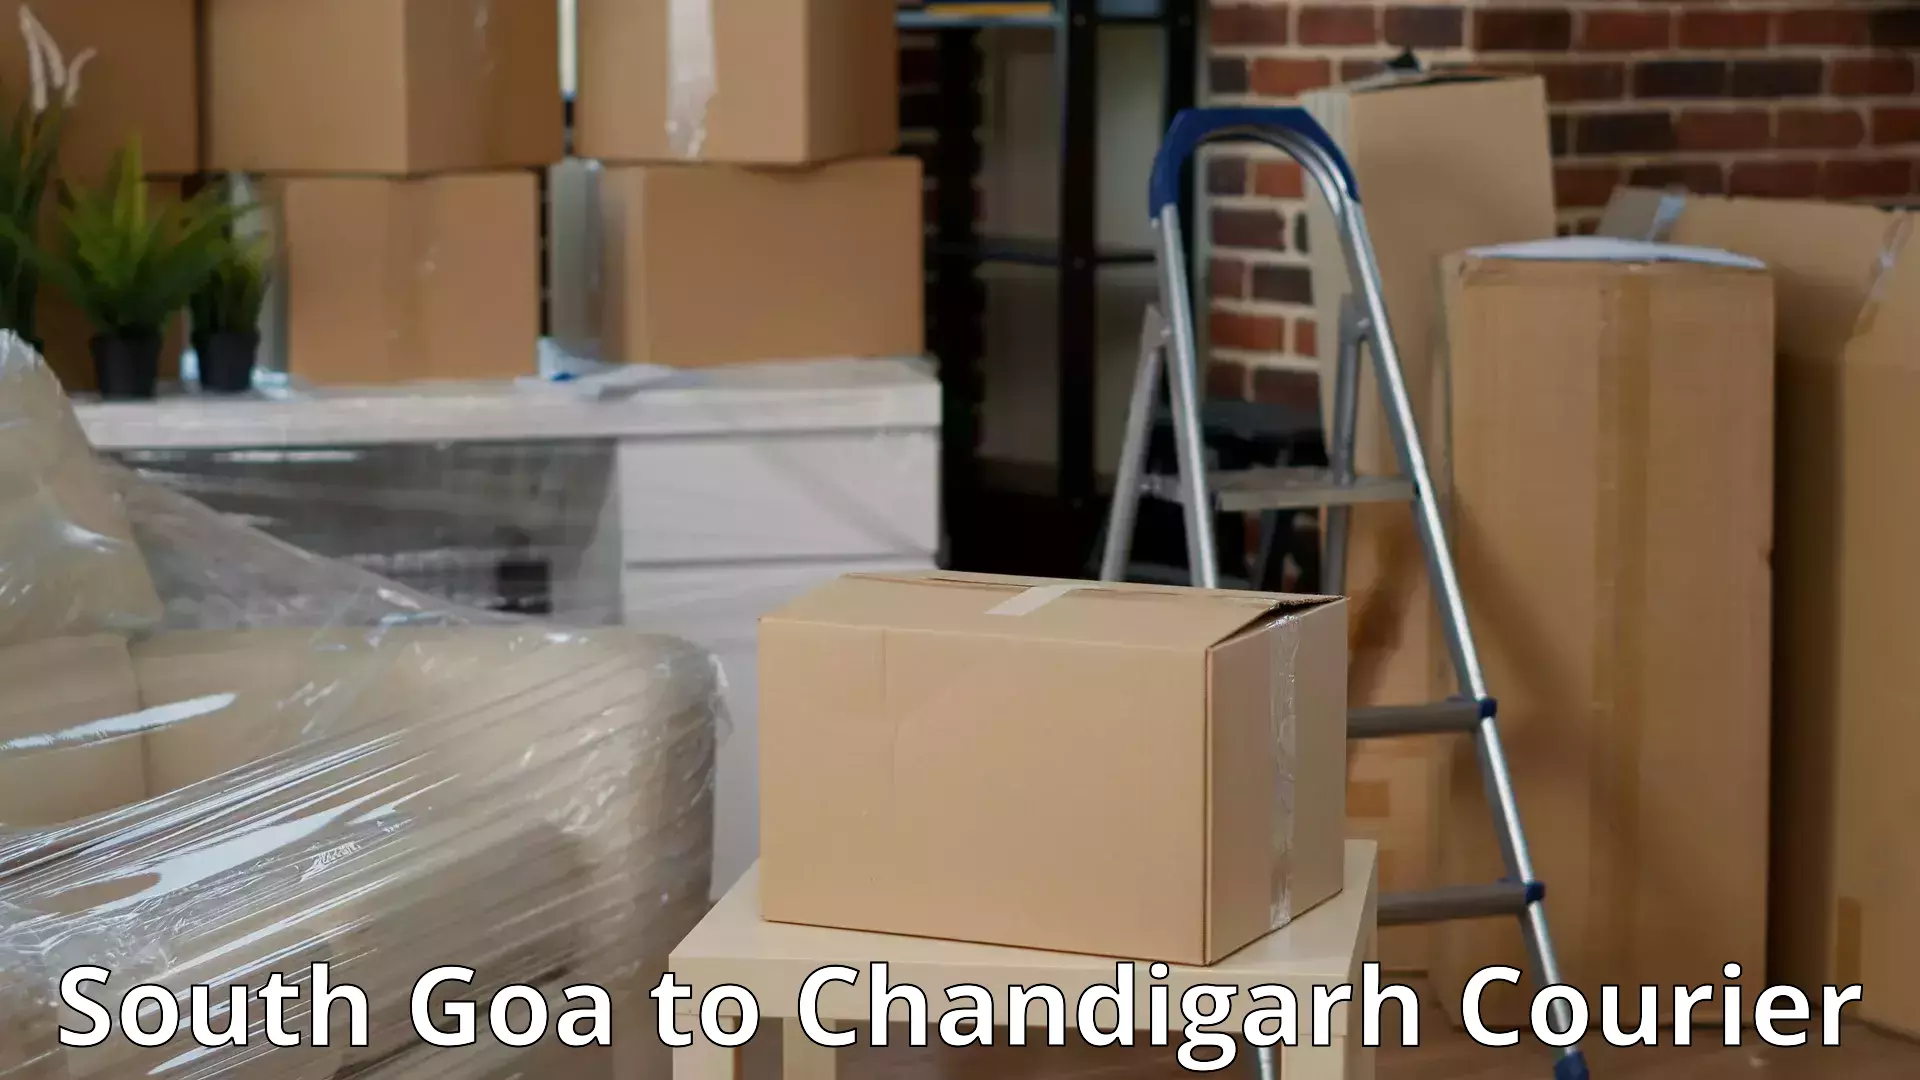 Furniture transport service South Goa to Chandigarh